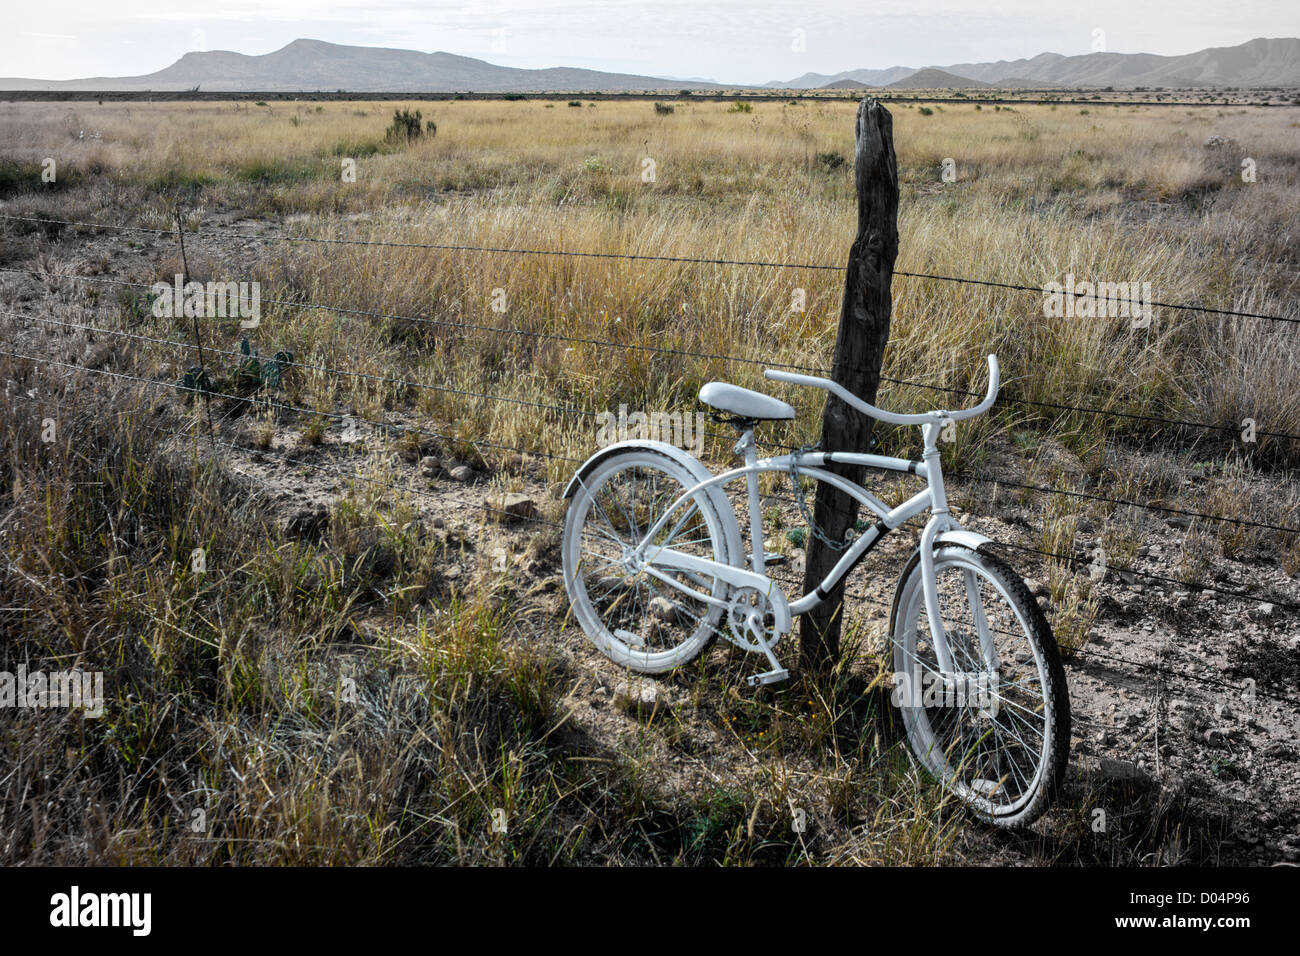 White bicycle called a White Ghost Bike, symbol of a cyclist death in the USA, near Marathon, Texas Stock Photo